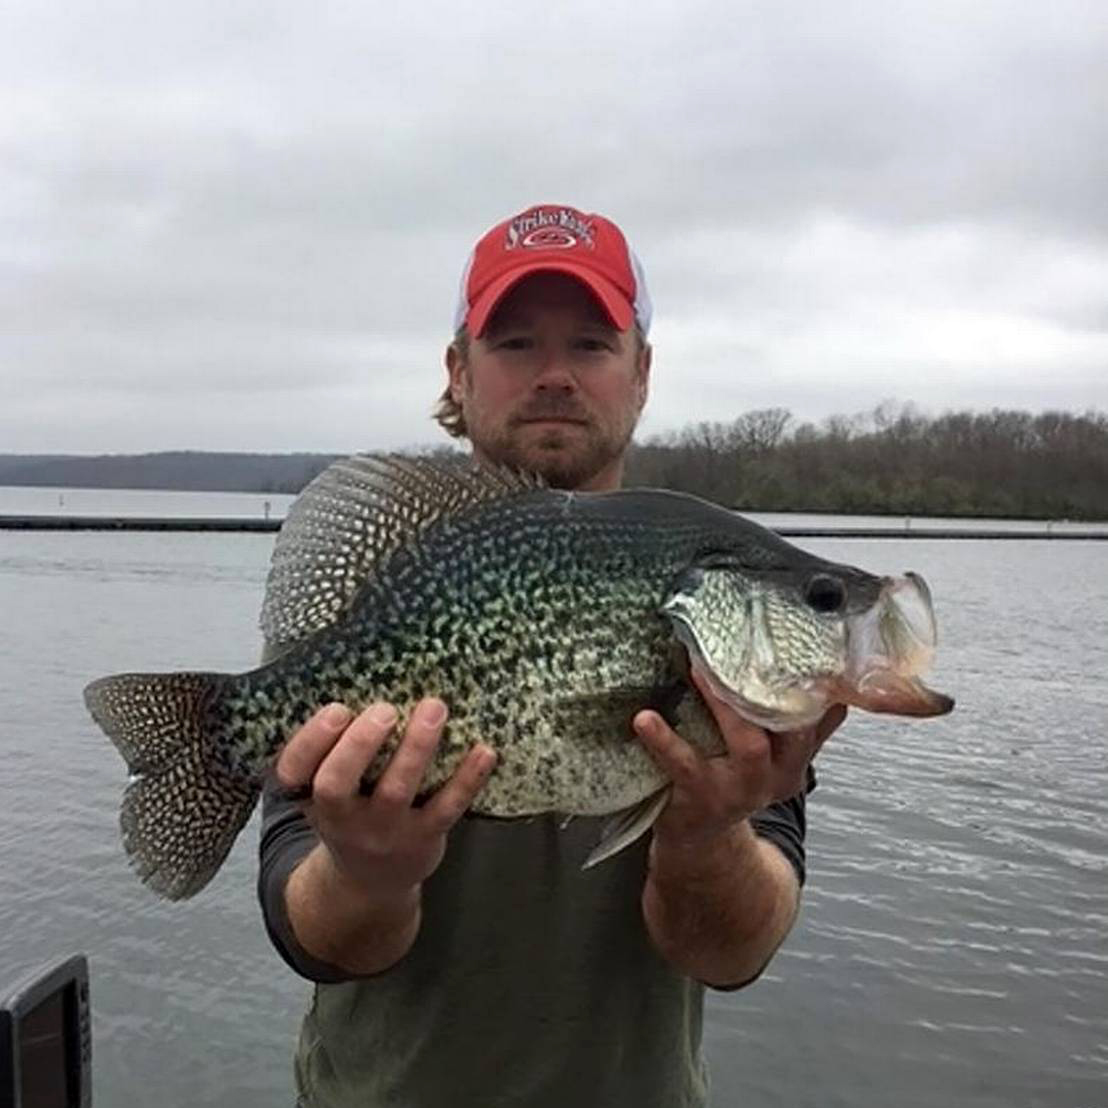 INHS genetic testing confirms new Illinois state-record crappie was a hybrid